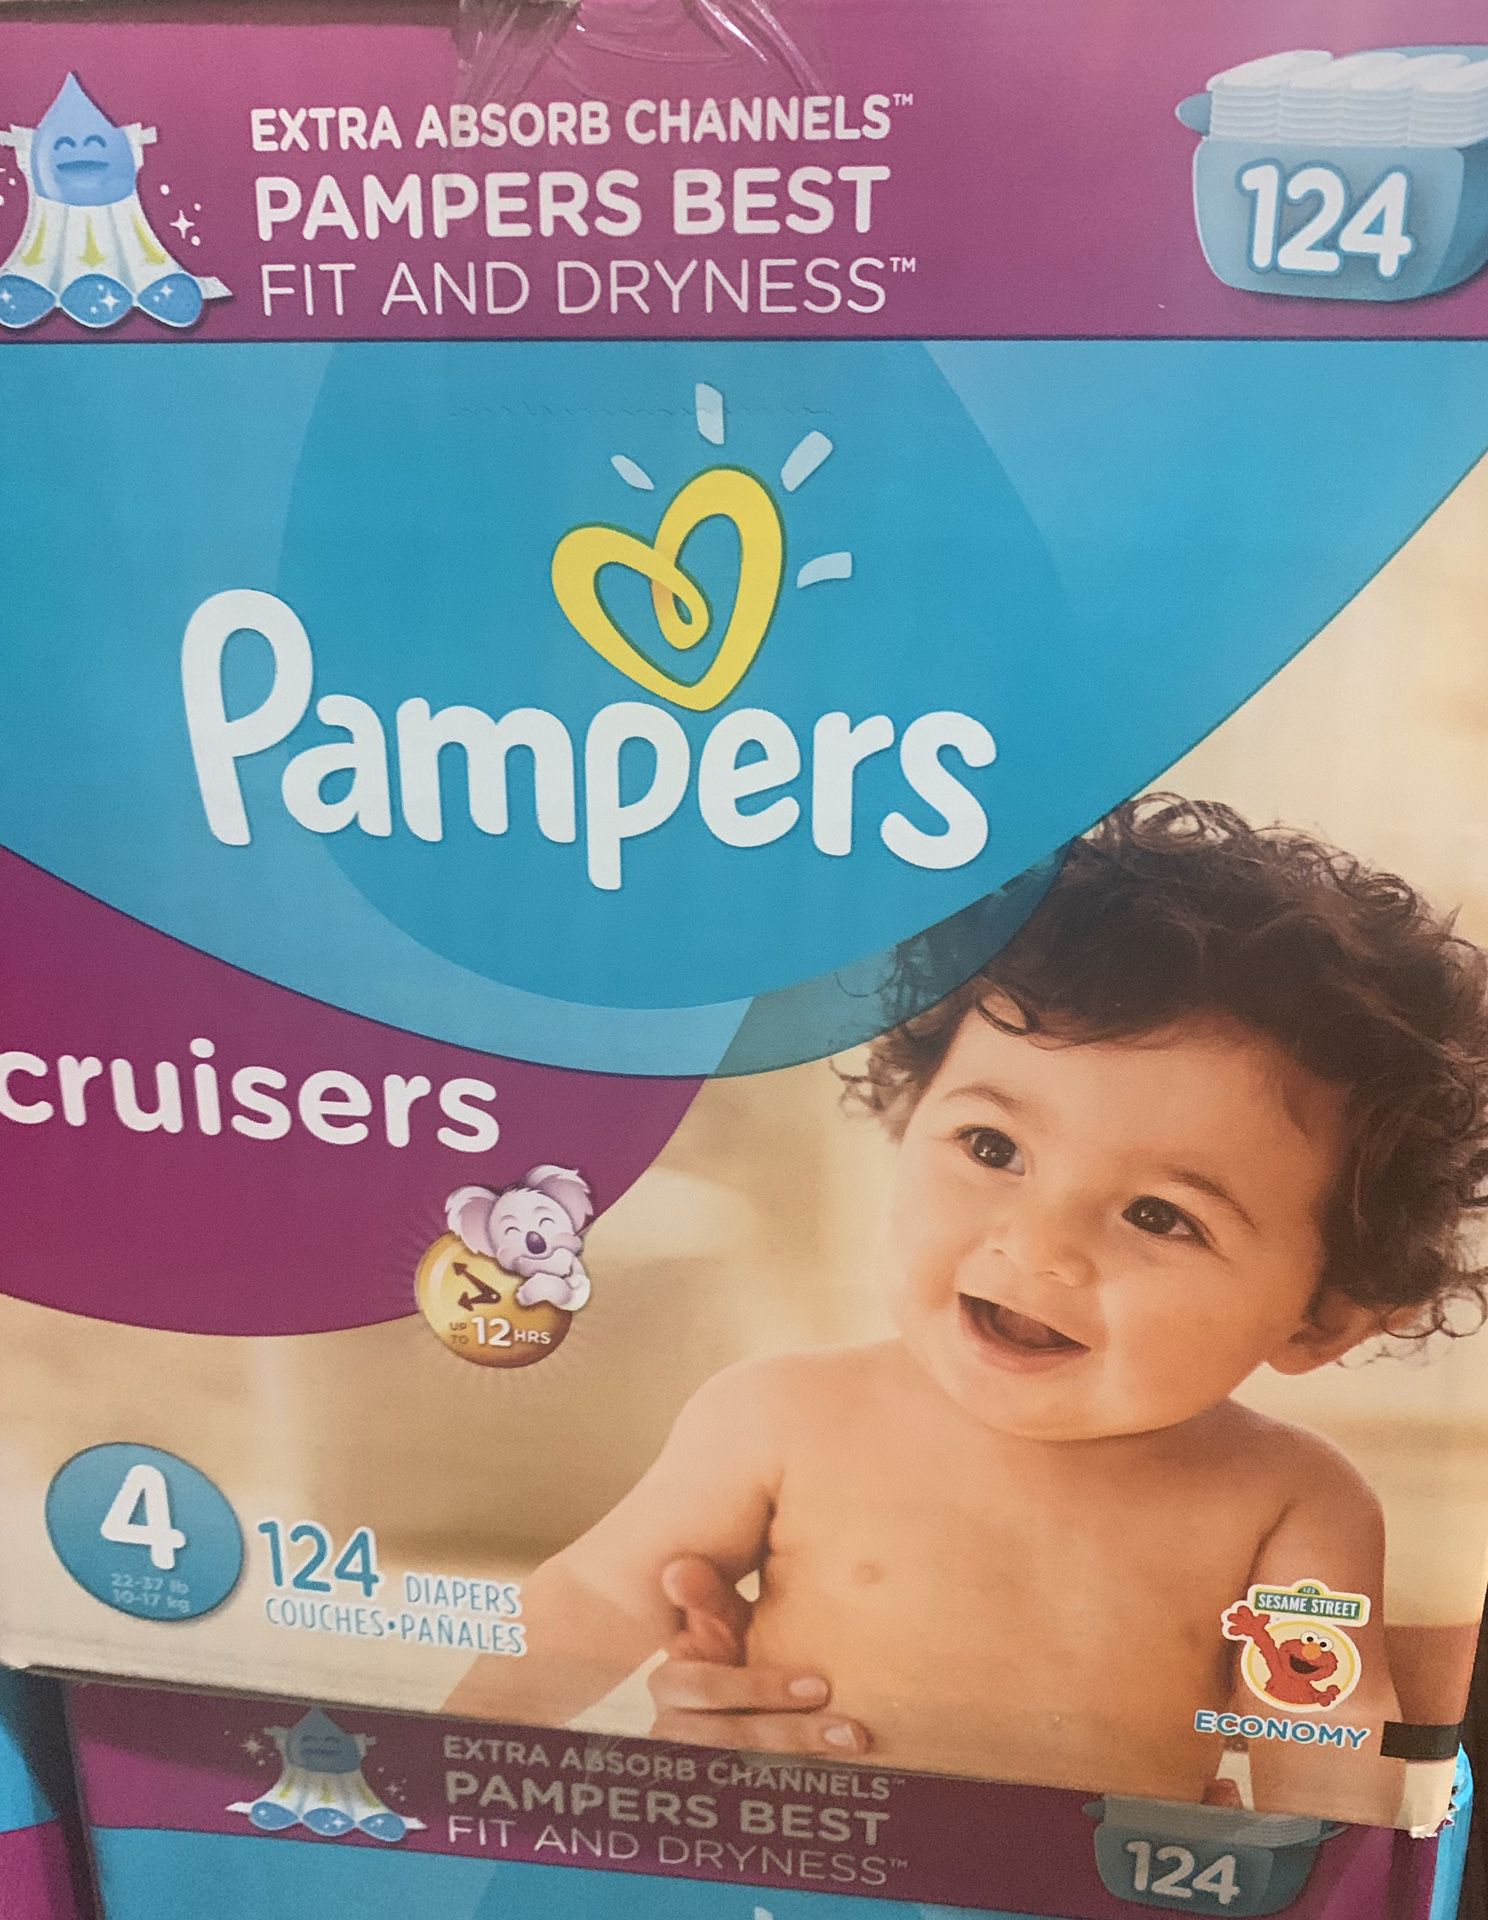 Pampers Cruisers size 4